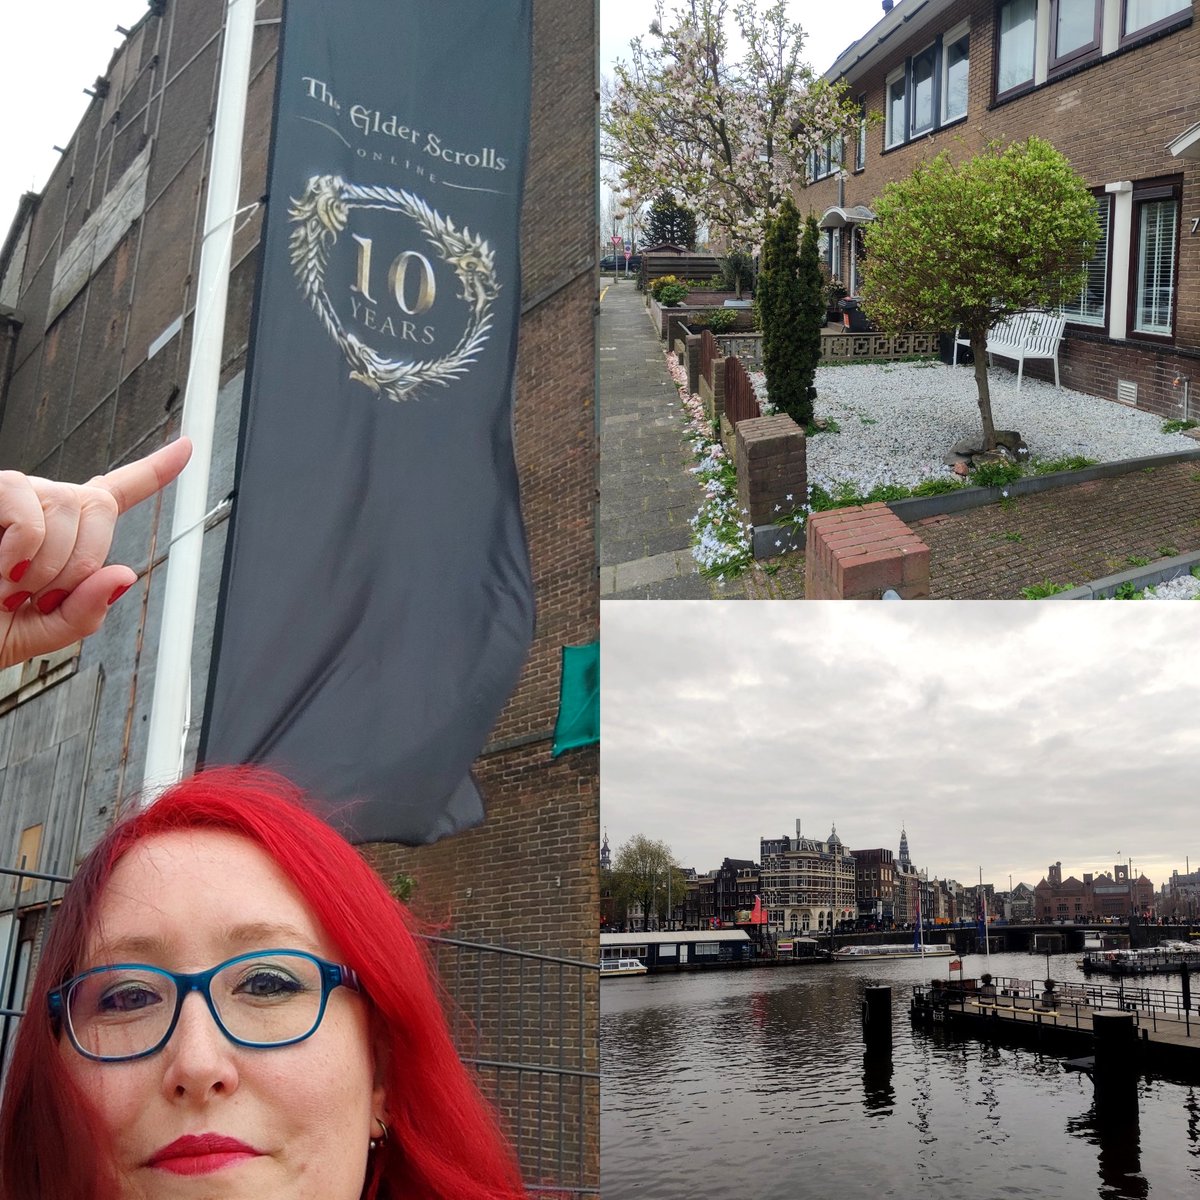 The other #ESO banner said 'You belong here' and was flapping in the wind like there's no tomorrow... Such an epic way to welcome us, thanks @GinaLBruno and #ESOTeam 💞 Happy to be in Amsterdam for #ESO10 and meet up with the #ESOFam 💖